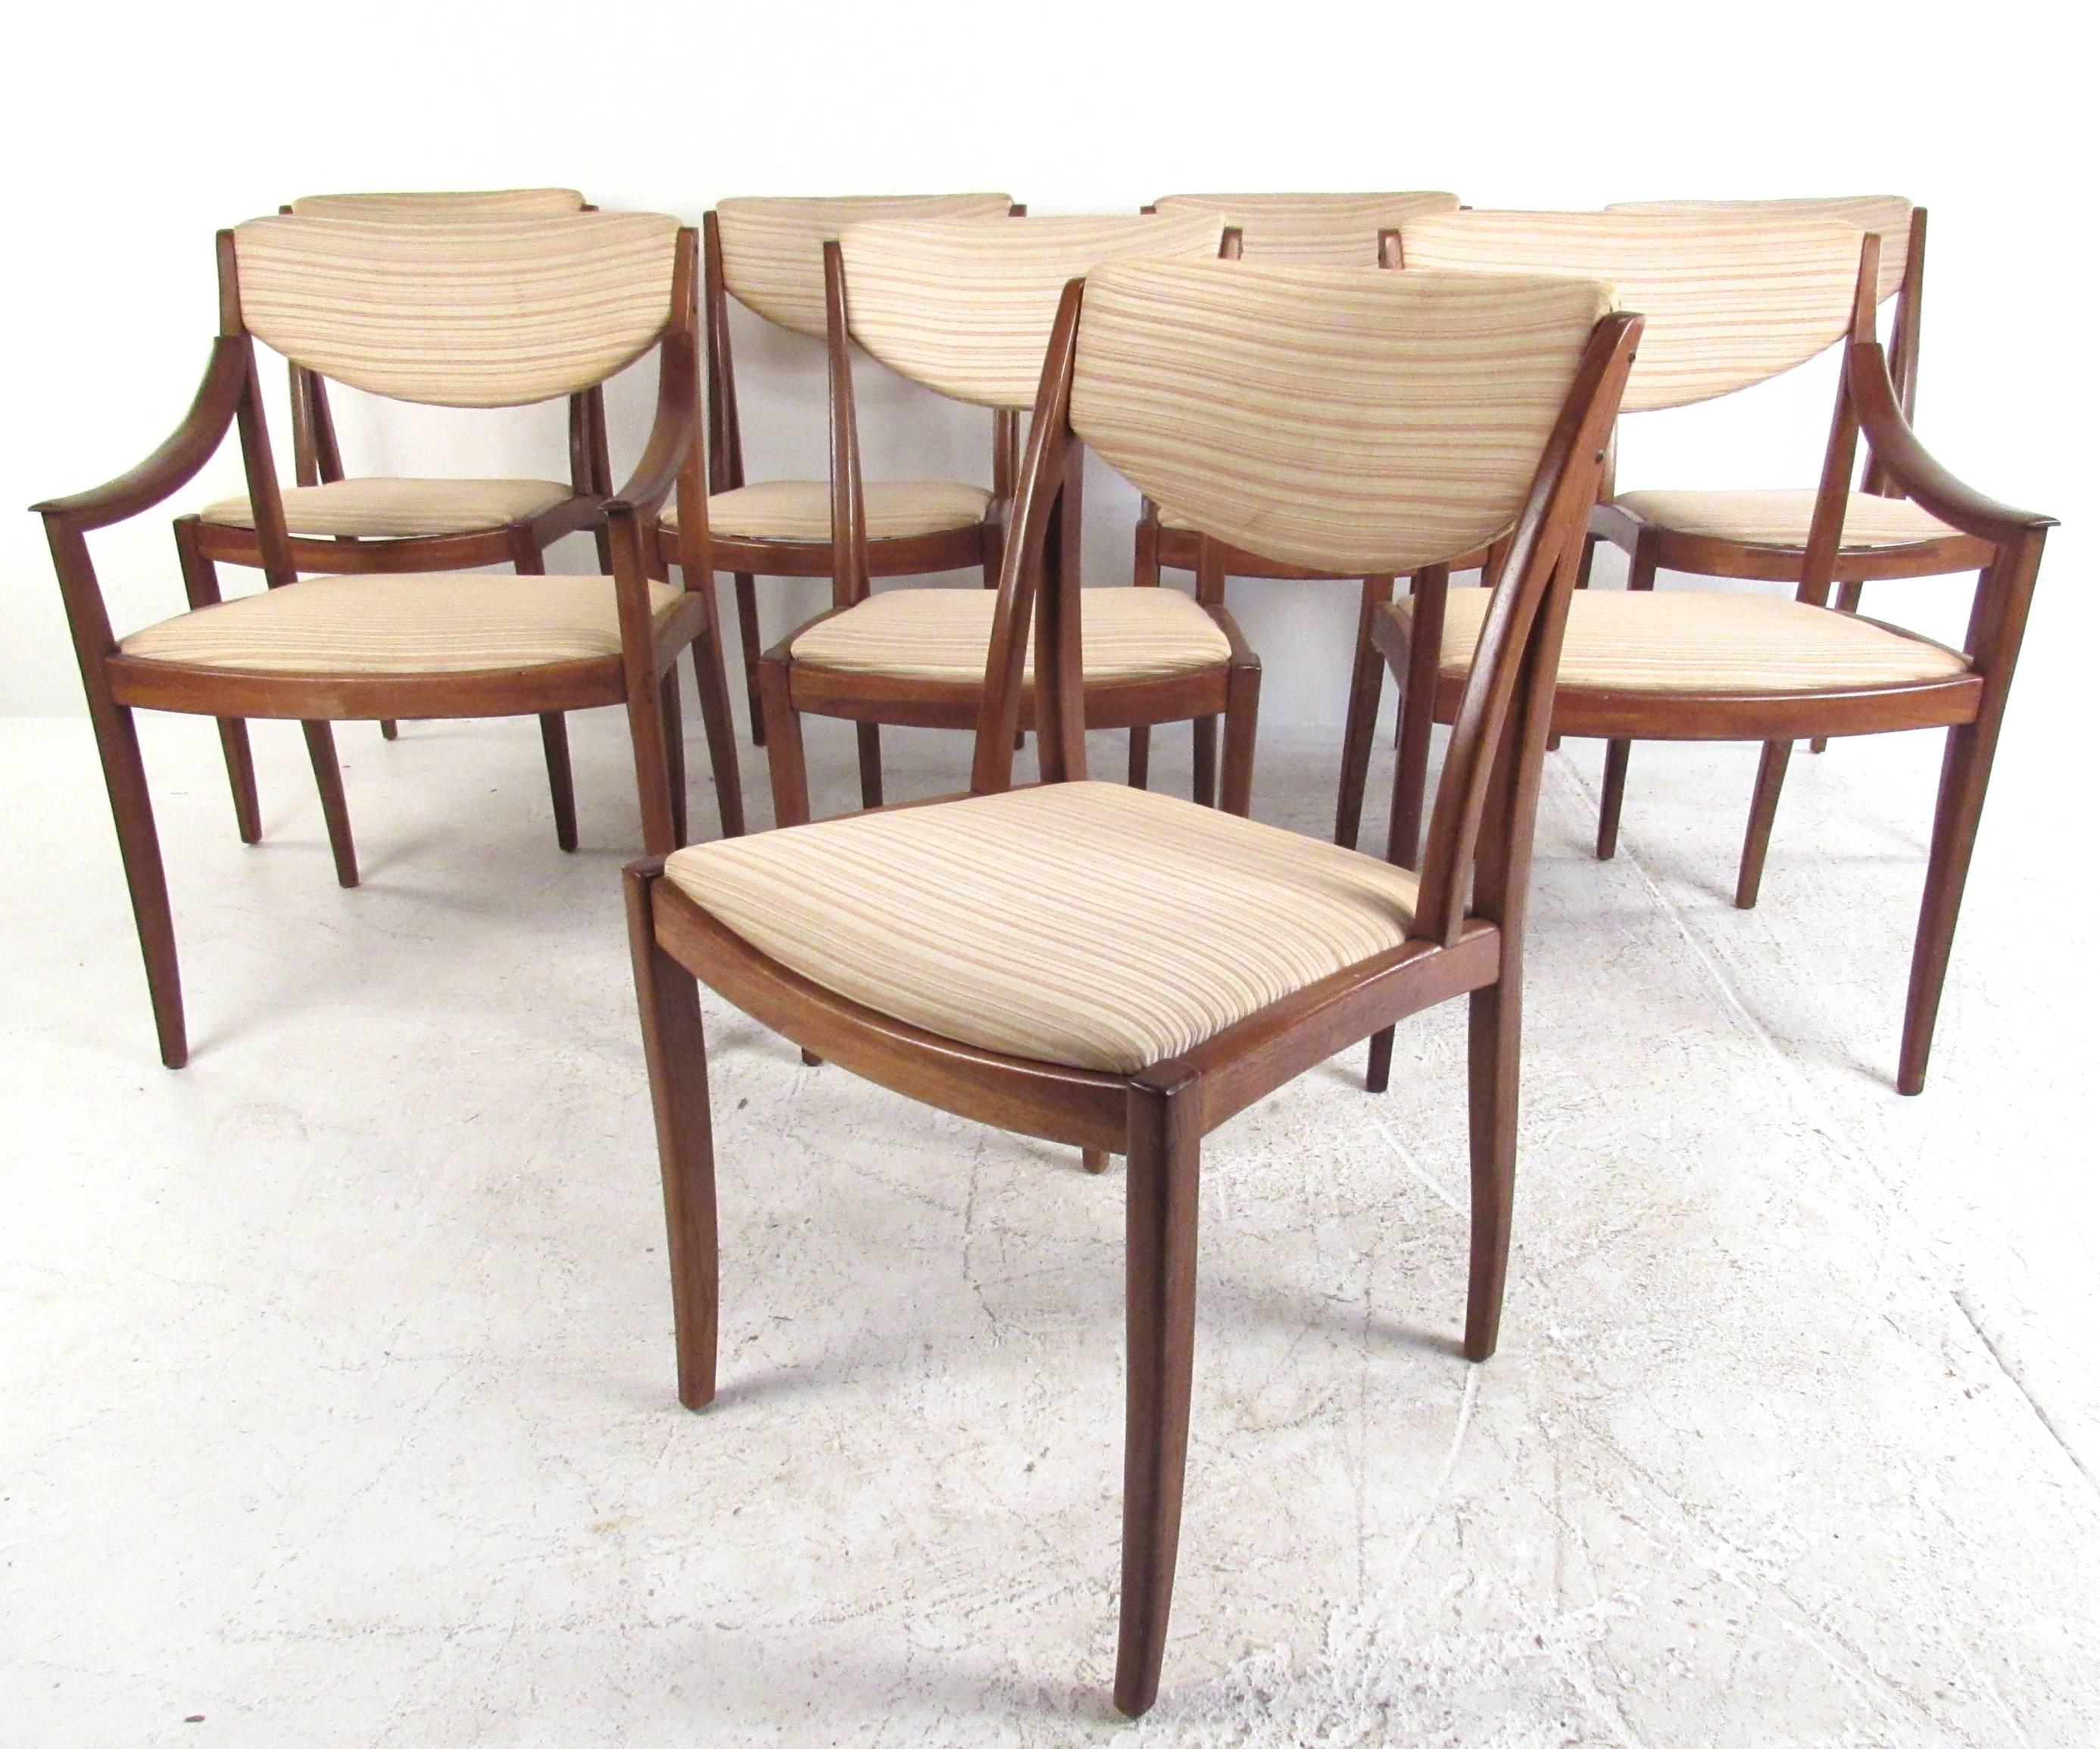 This set of eight vintage walnut dining chairs includes two armchairs and six side chairs. Comfortable and sturdy tapered frames feature upholstered/padded seats and seat backs. Unique Mid-Century style makes these chairs a beautiful addition to any